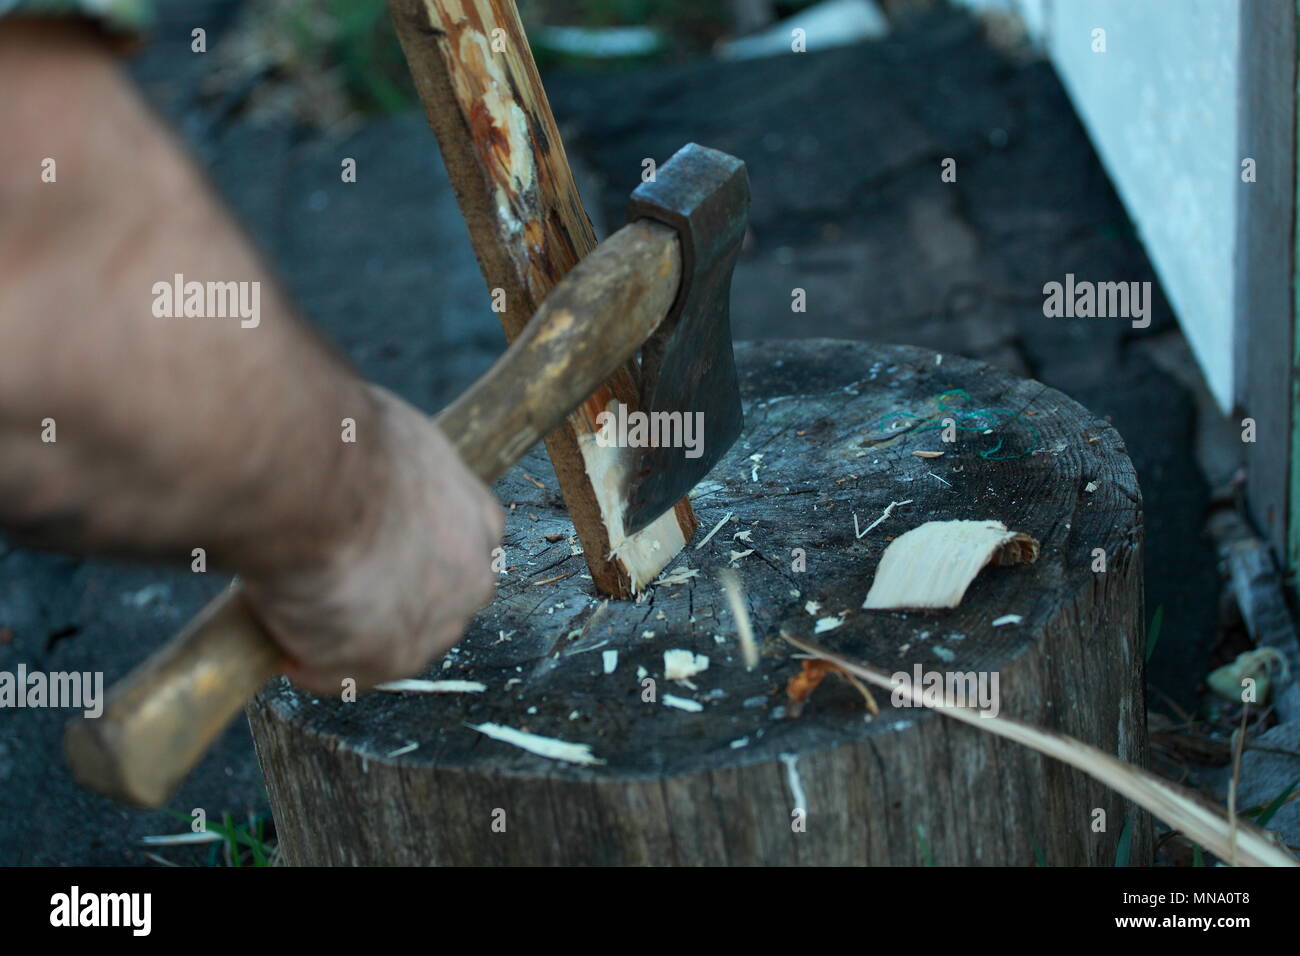 The blow of the axe on the Board. Cut the tree. Man chopping wood. Stock Photo